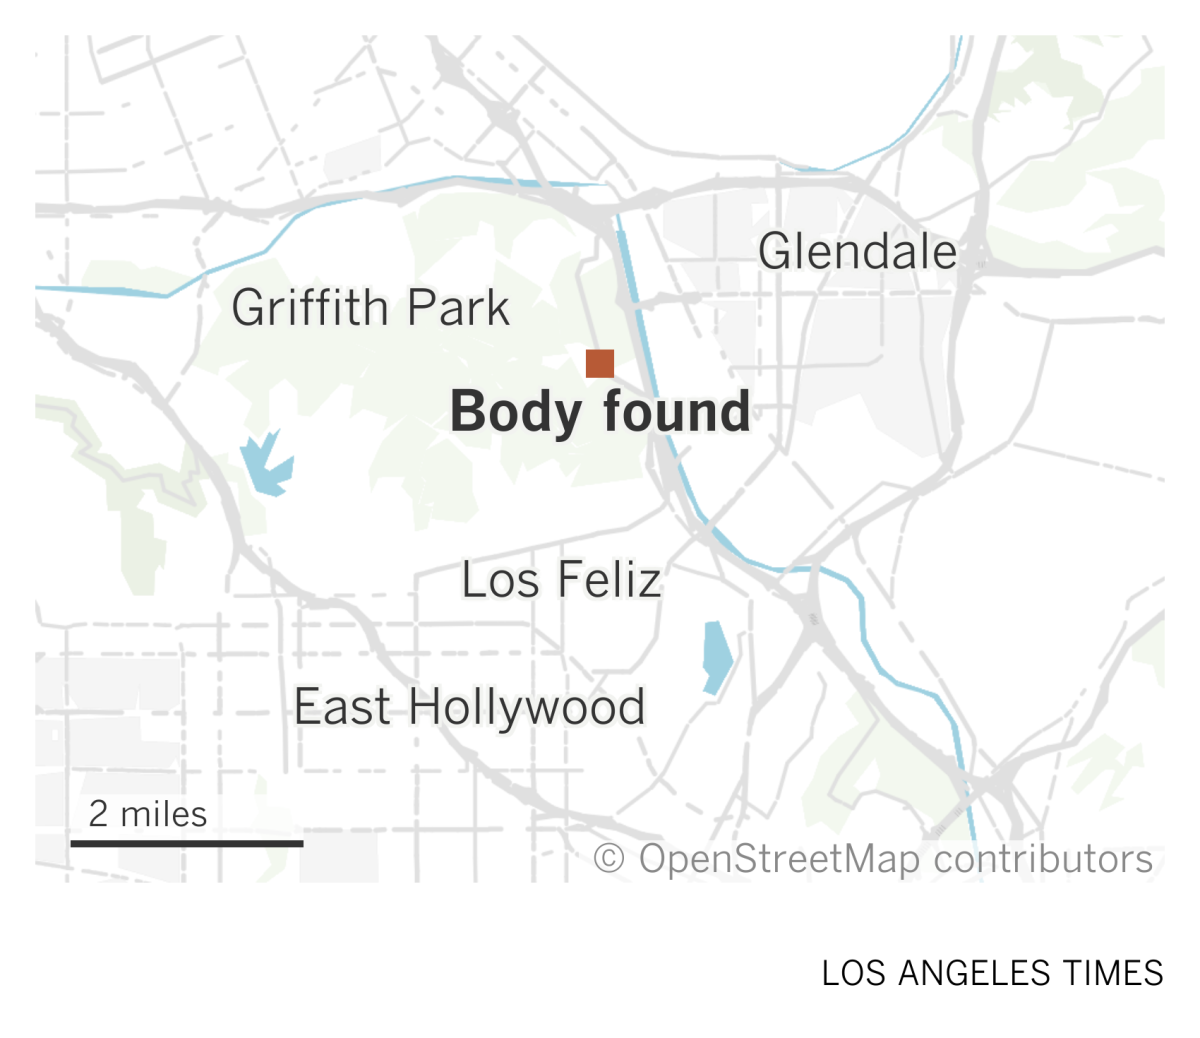 A map of the area around Griffith Park in Los Angeles showing where a body was found on the east end of the park